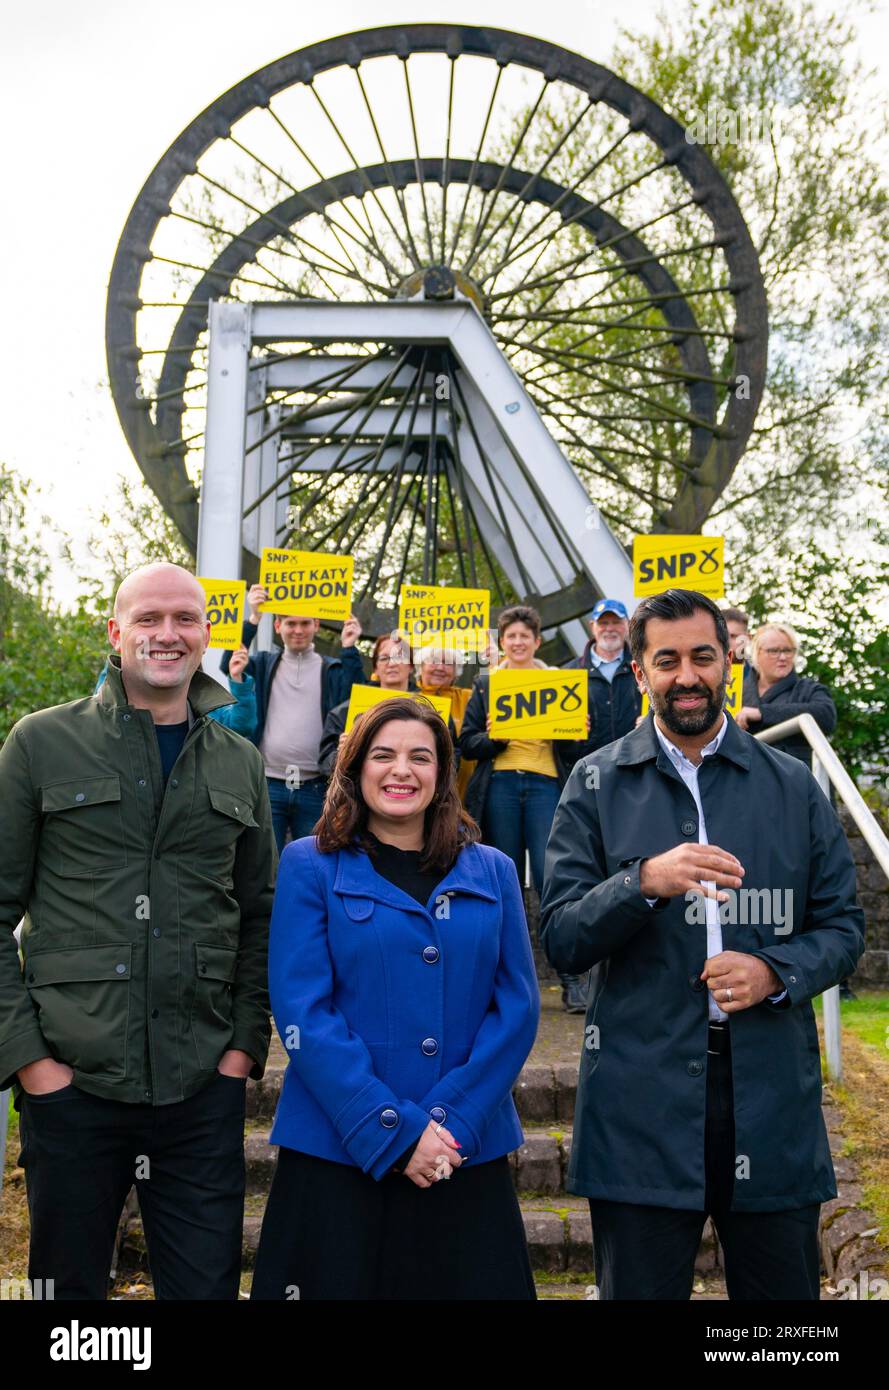 Glasgow, Scotland, UK. 25th September 2023. First Minister and SNP Leader, Humza Yousaf joins SNP Westminster Leader, Stephen Flynn and SNP candidate Katy Loudon at the Cambuslang Miners Monument today ahead of the Rutherglen and Hamilton West by-election which will be held on 5th October.   Iain Masterton/Alamy Live News Stock Photo